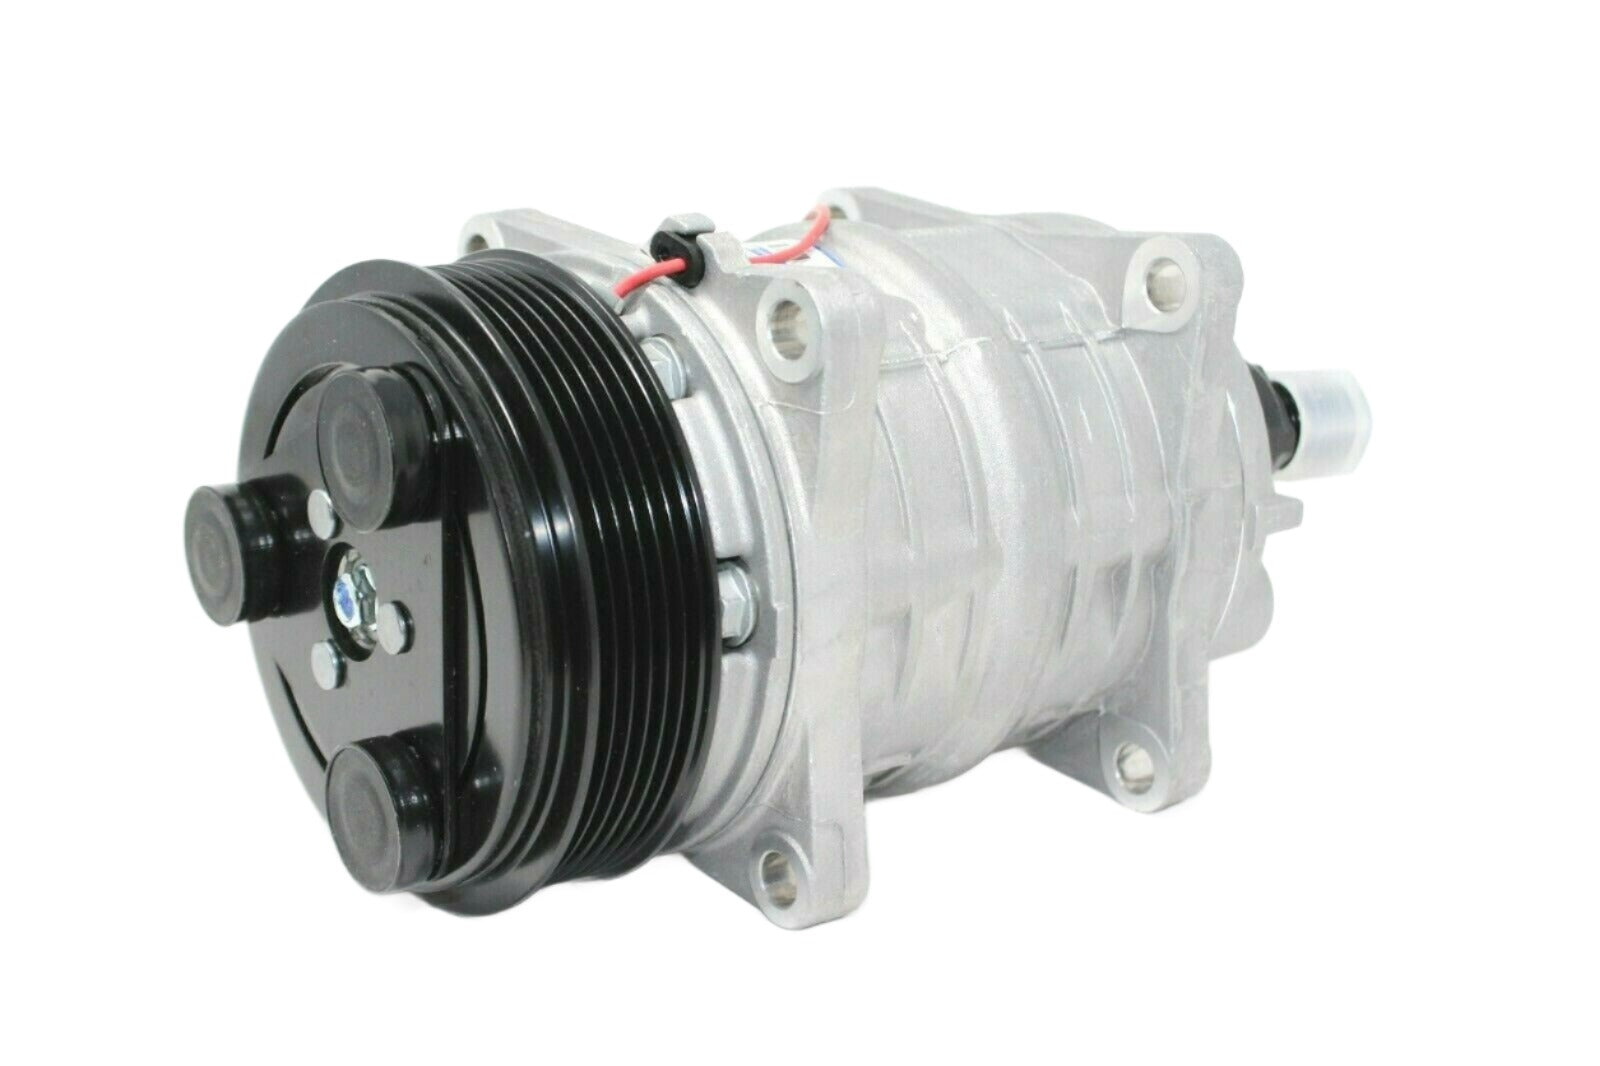 Seltec Style Ac Compressor For Thermo King Tripac 1021290 75R85832Q